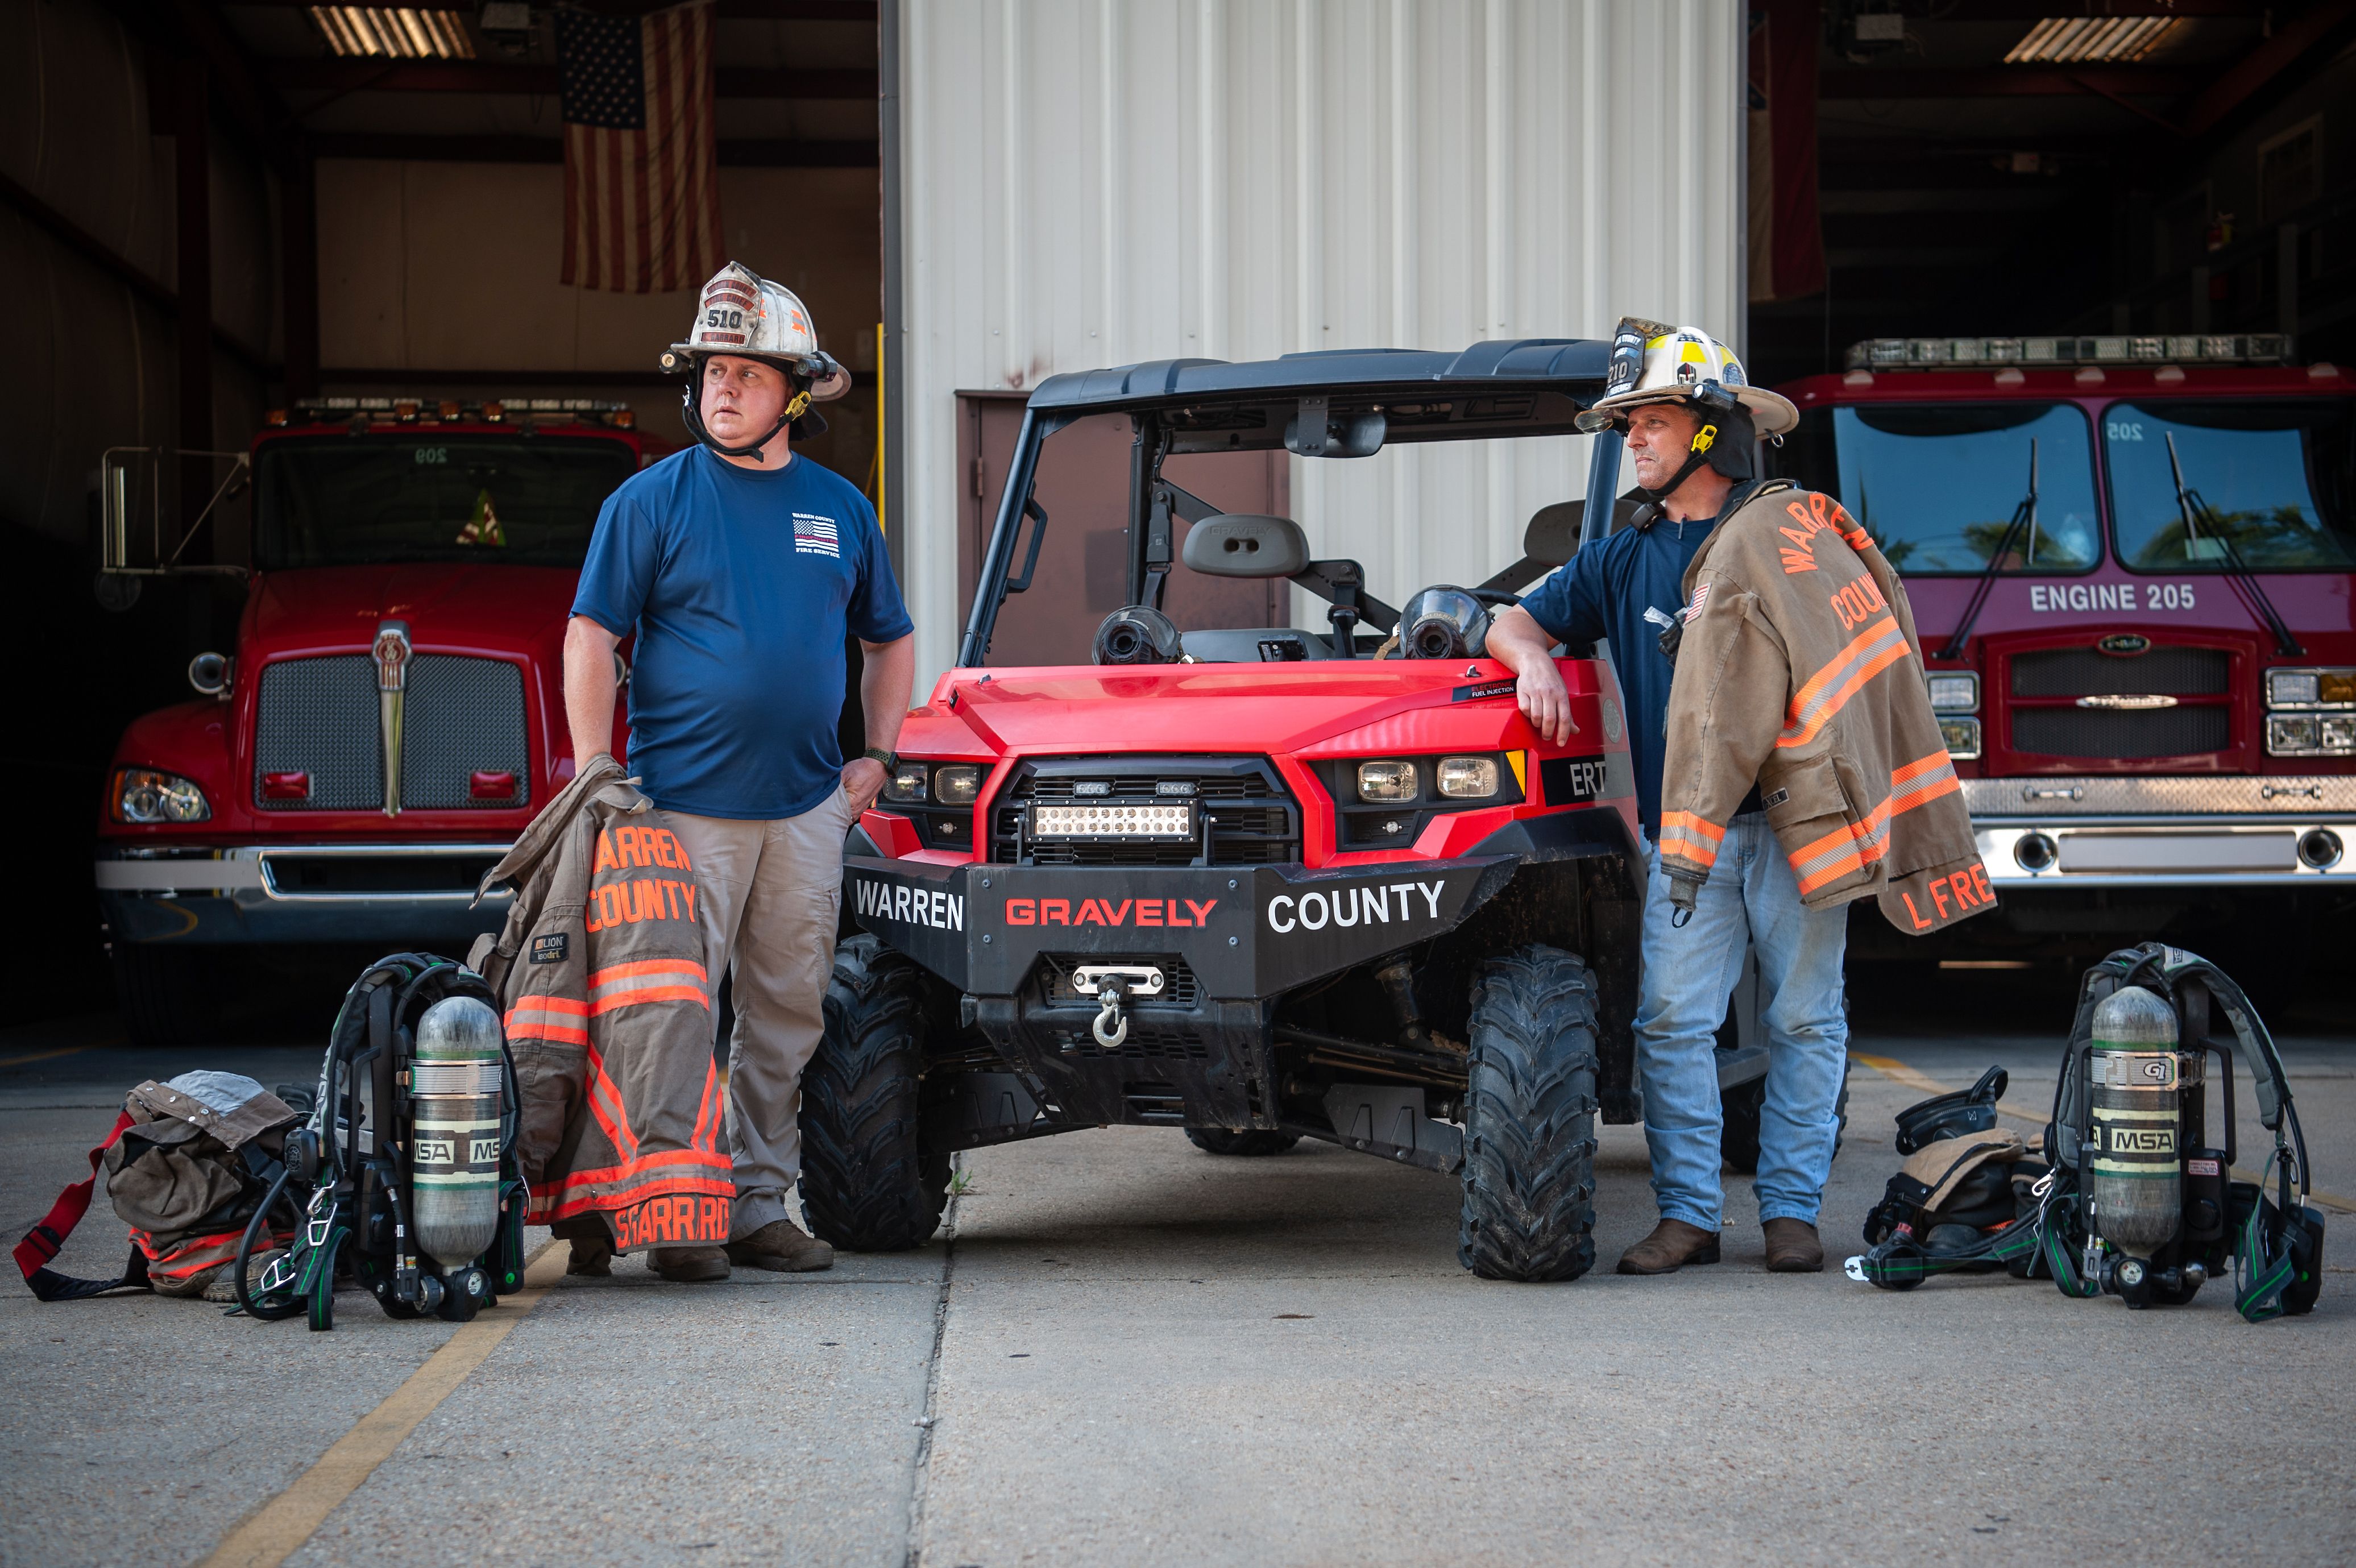 Warren County firefighters Shane Garrard (left) and Lamar Frederick in Vicksburg, Mississippi, in July. They're next to the utility task vehicle they used during the February 2020 gas leak in Satartia. Rory Doyle for HuffPost.